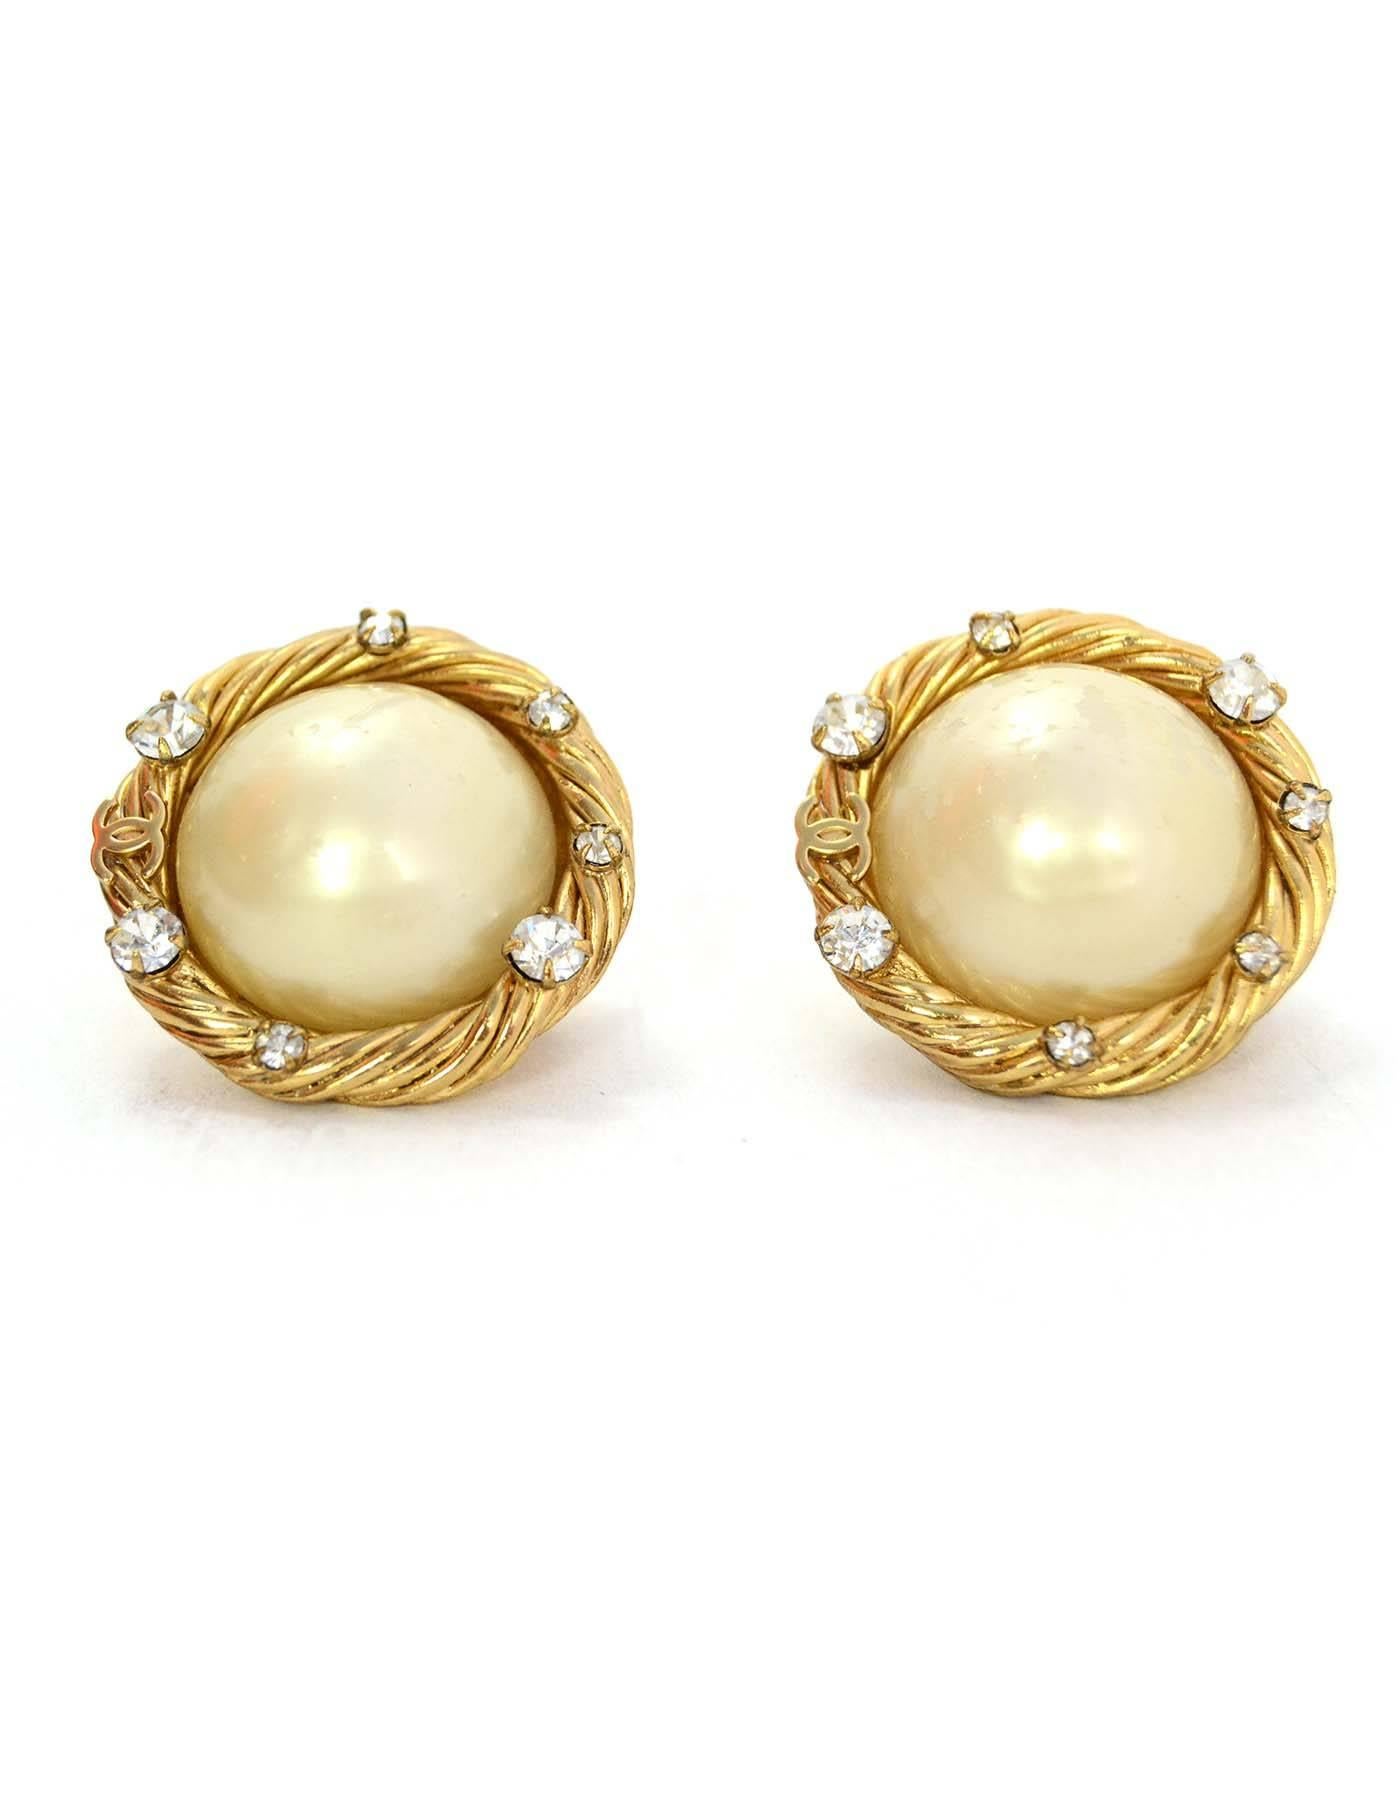 Chanel Goldtone, Pearl and Crystal Clip On Earrings 

Made In: France
Year of Production: 2001
Color: Goldtone and ivory
Materials: Faux pearl and metal
Closure: Clip on
Stamp: Chanel 01 CC P Made in France
Overall Condition: Very good